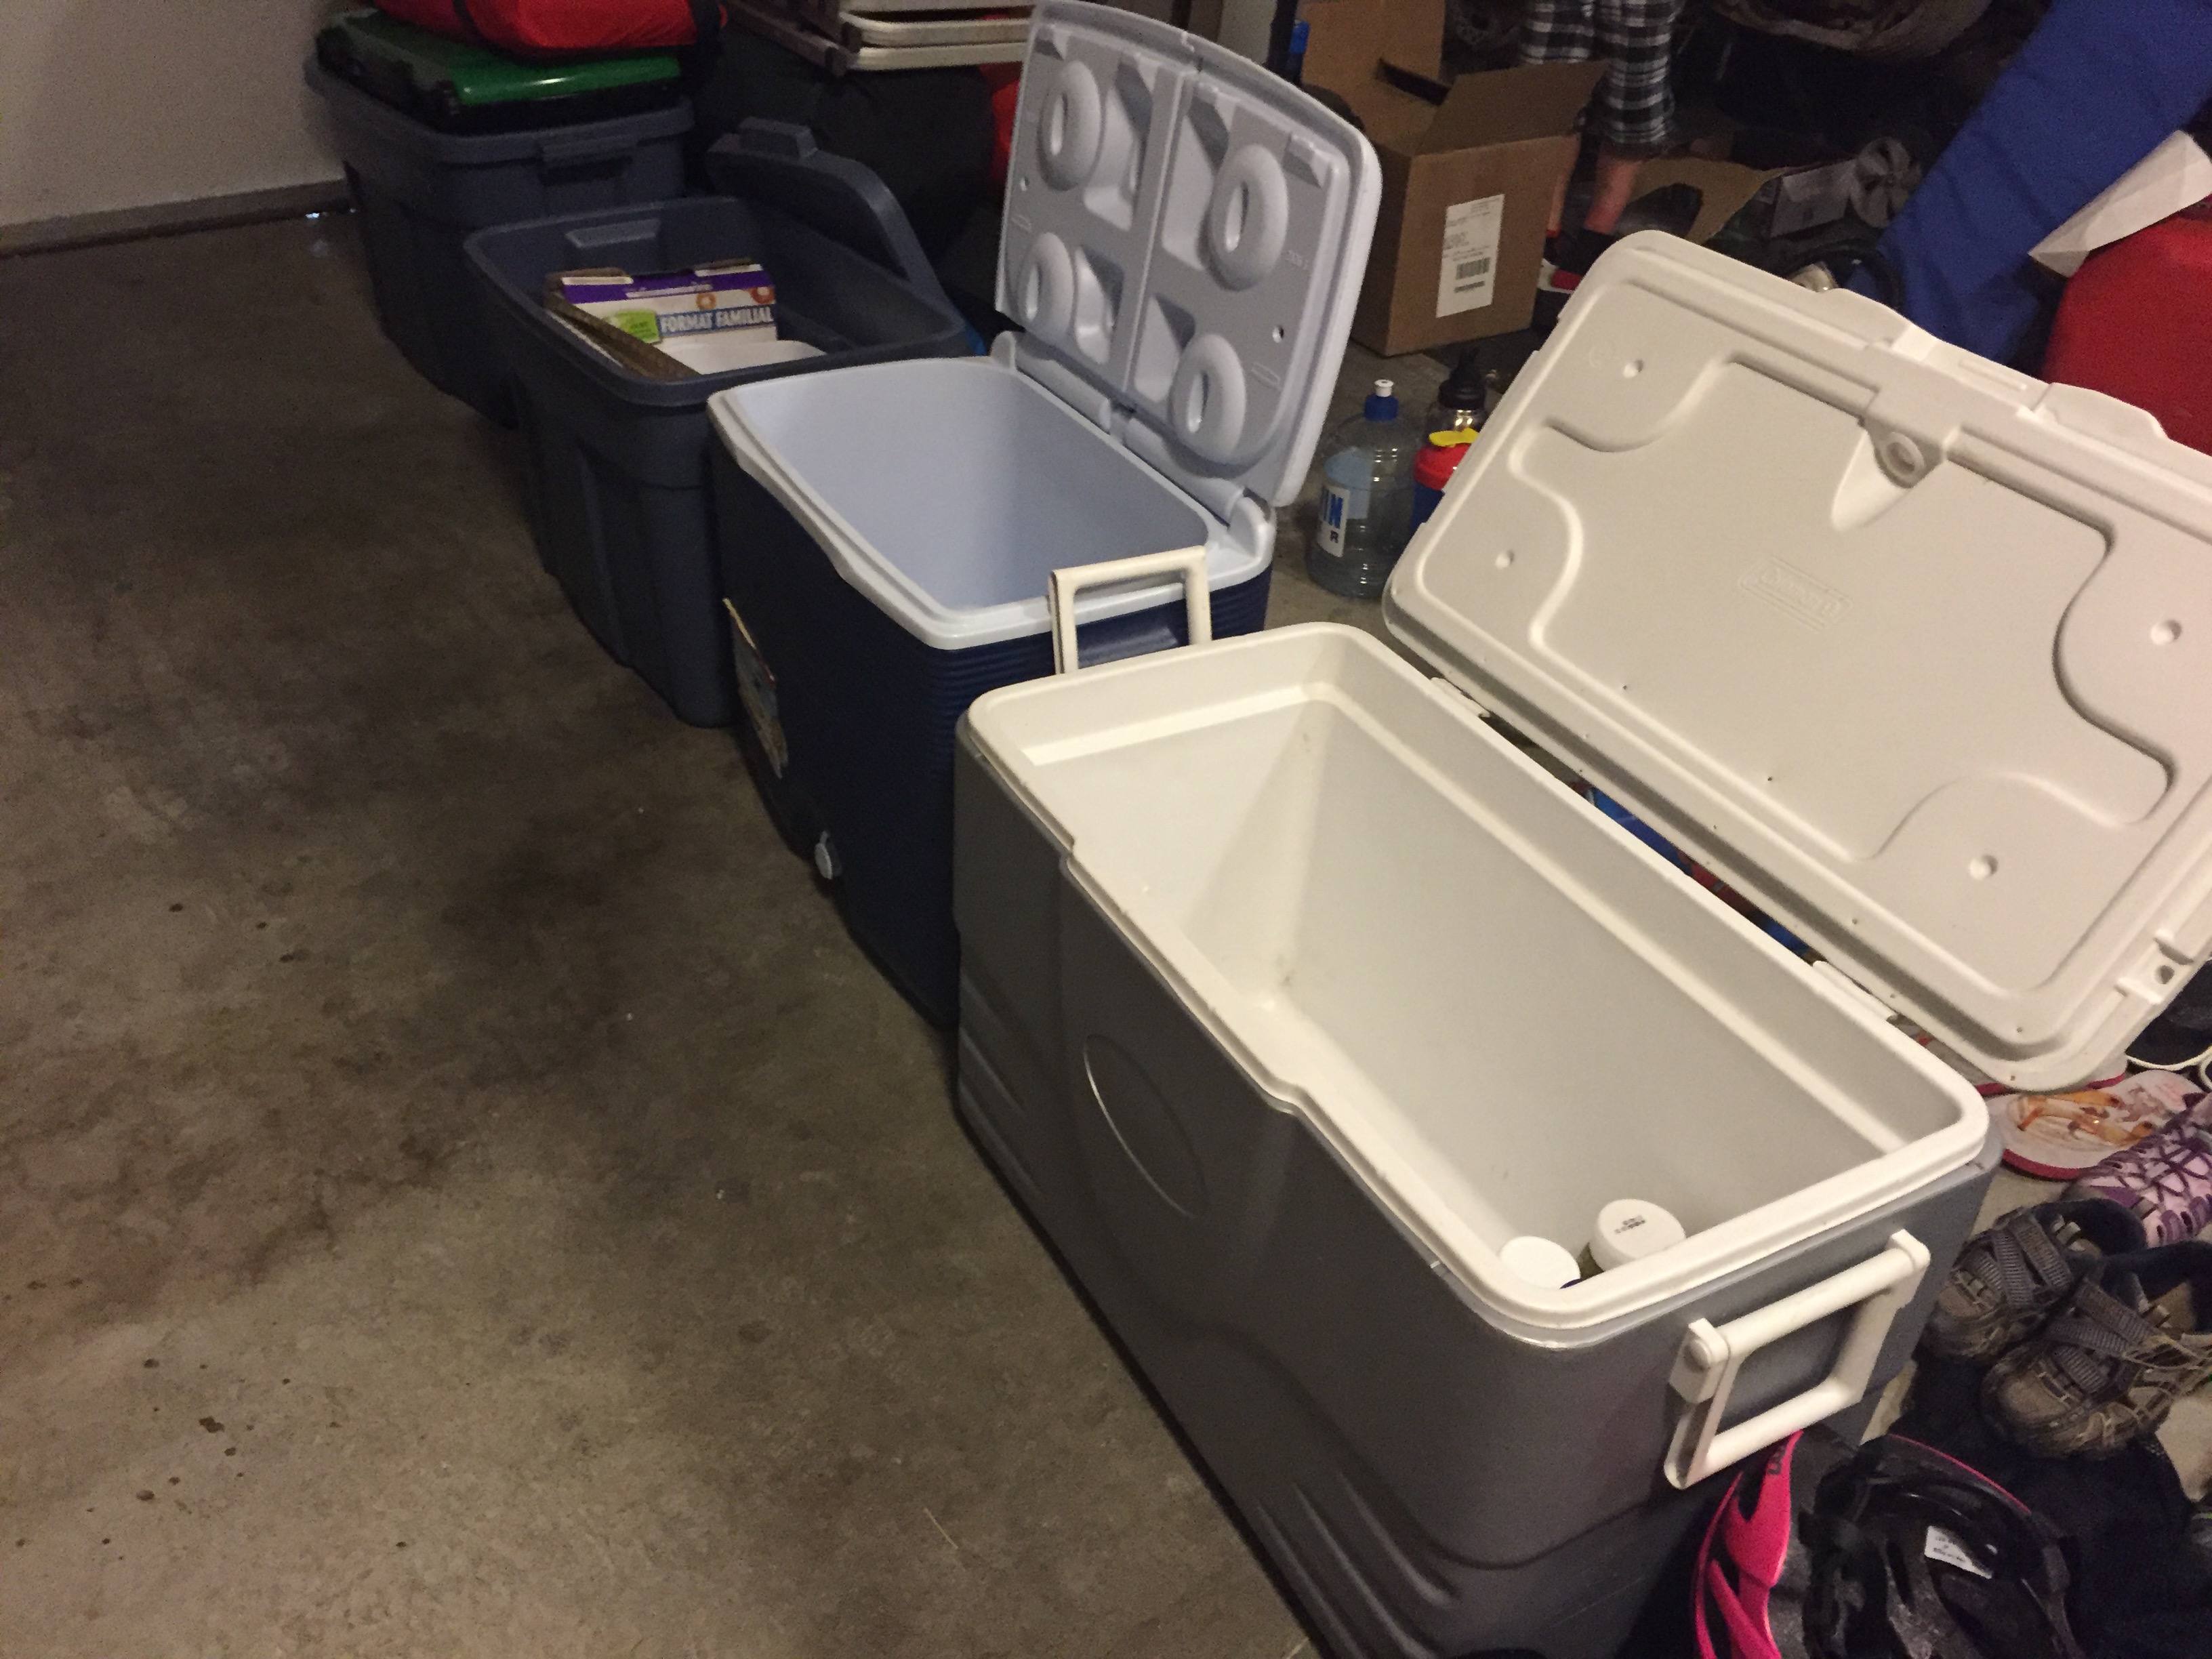 Coolers and bins ready to go for how to pack for a road trip